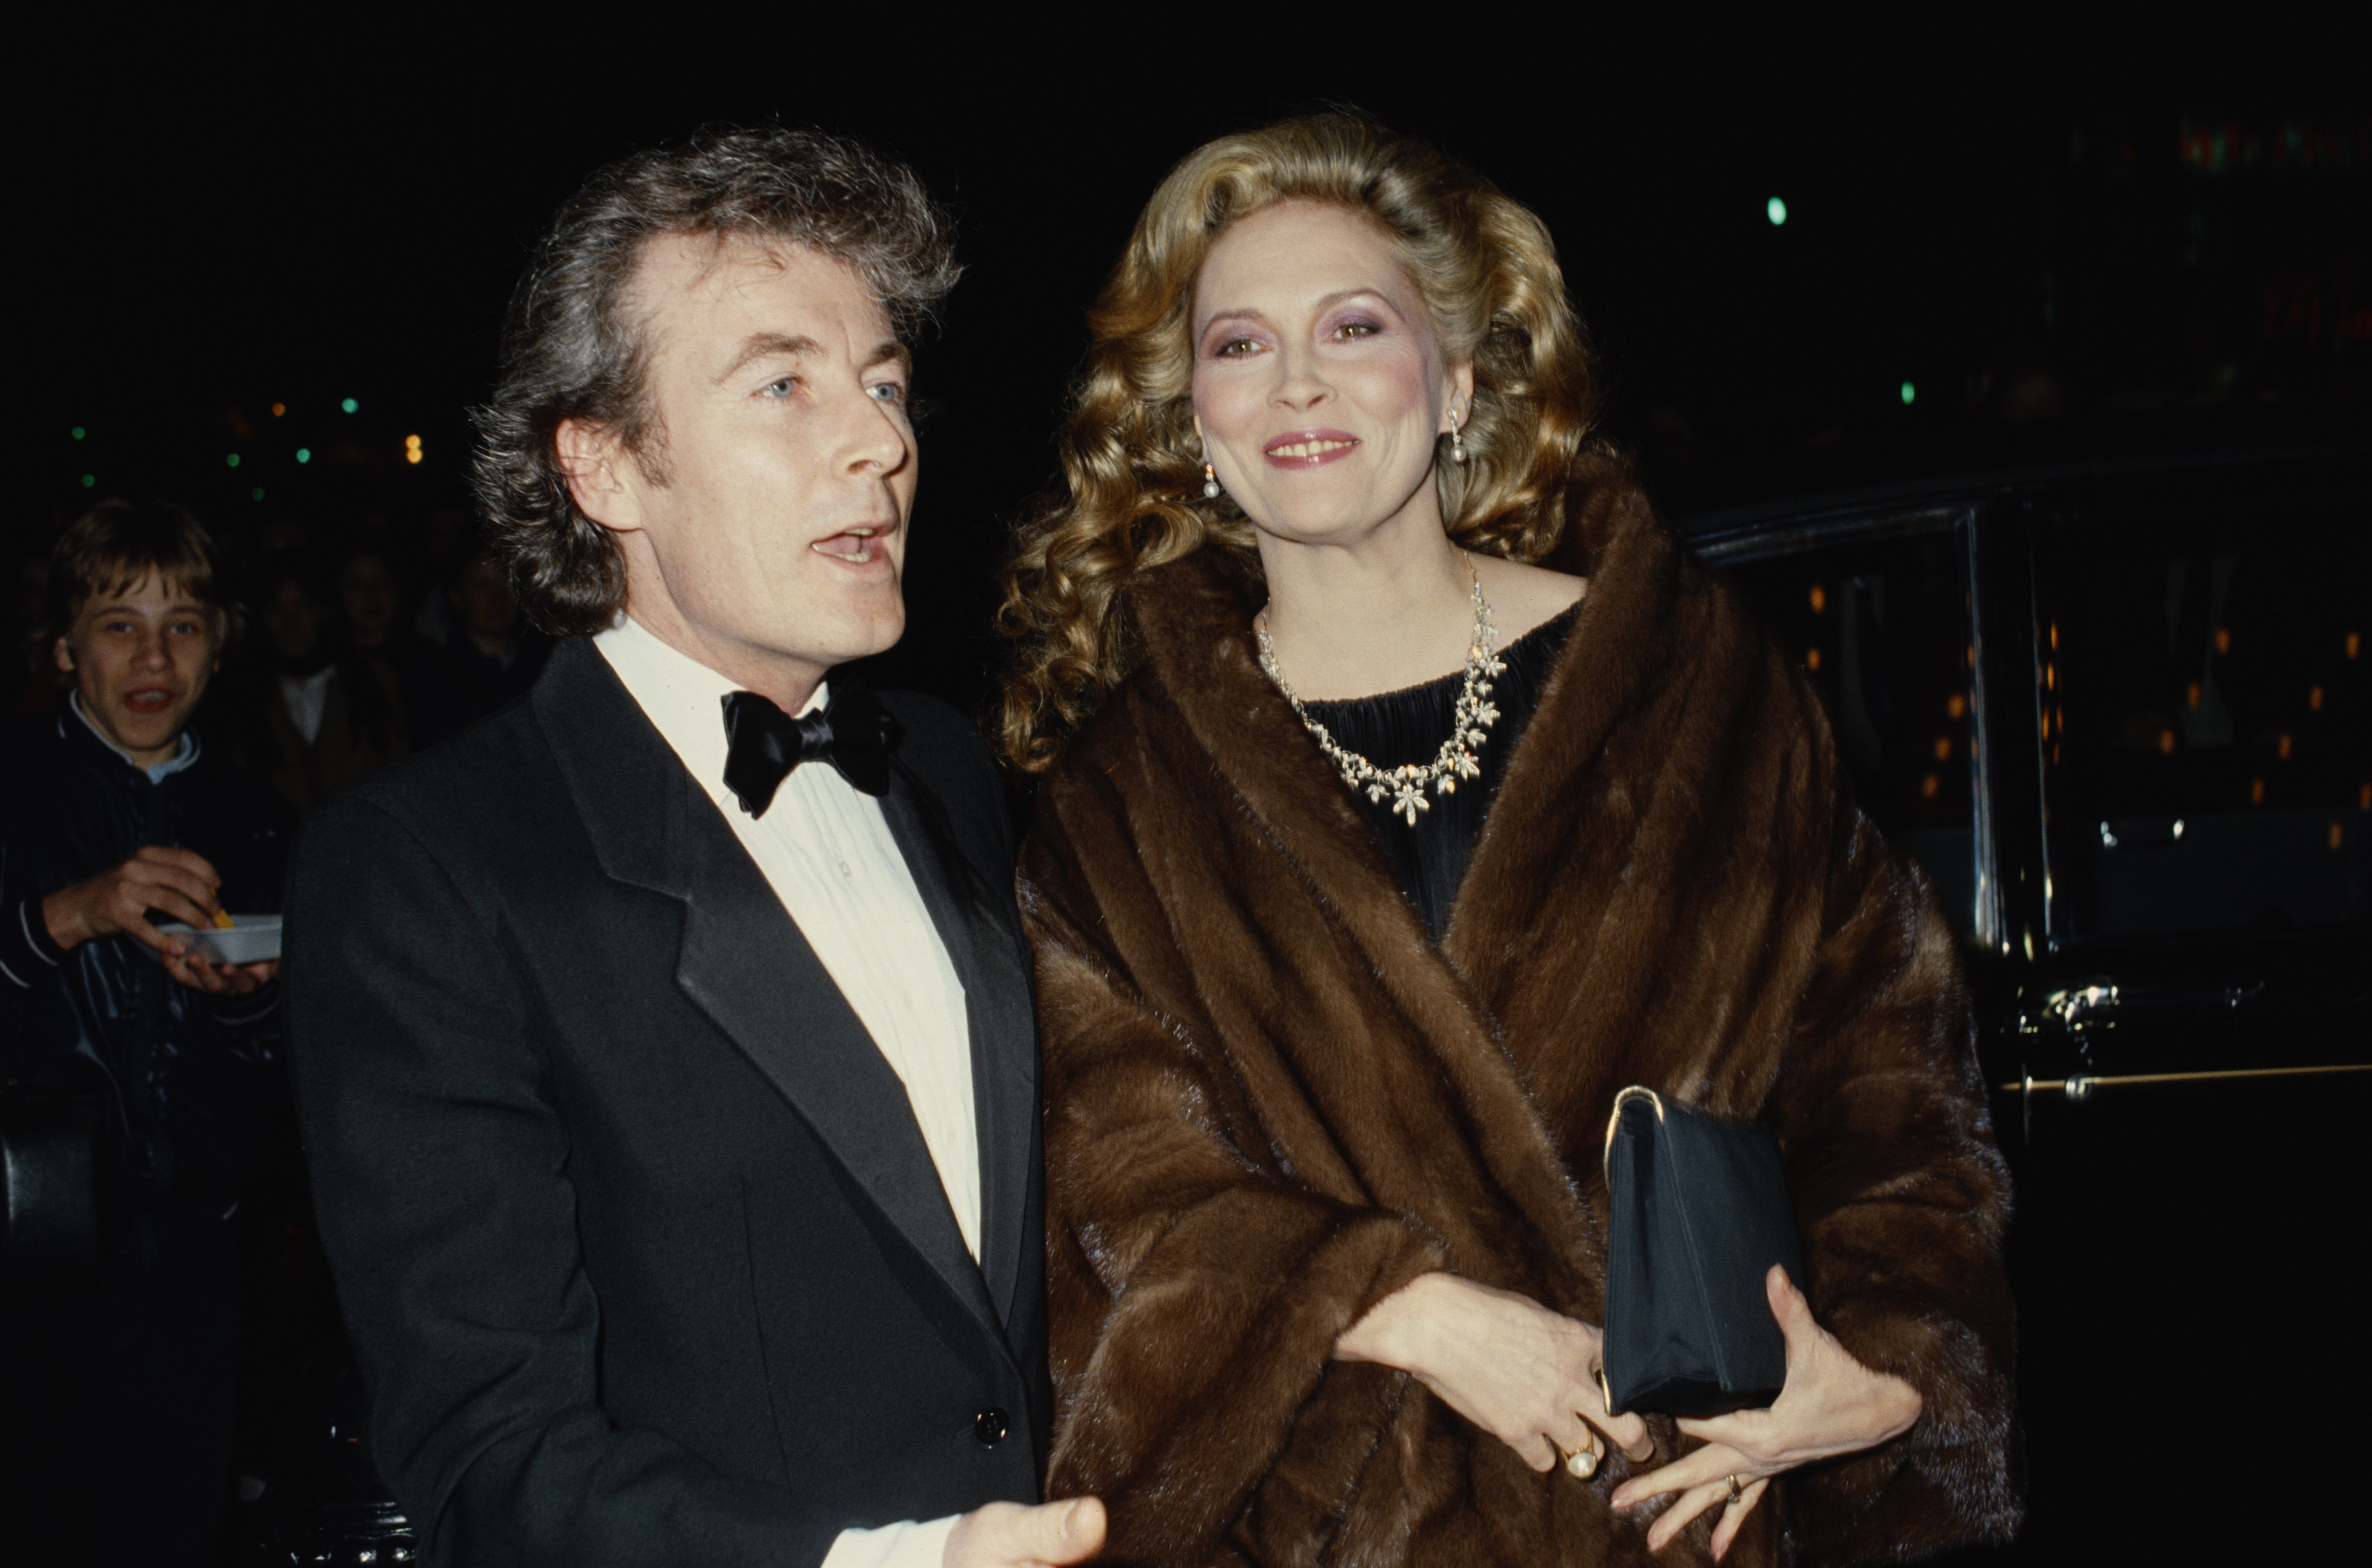 Faye Dunaway and Terry O'Neill attends the premiere of the film "The Wicked Lady" in Leicester Square, London, 1983. | Photo: Getty Images